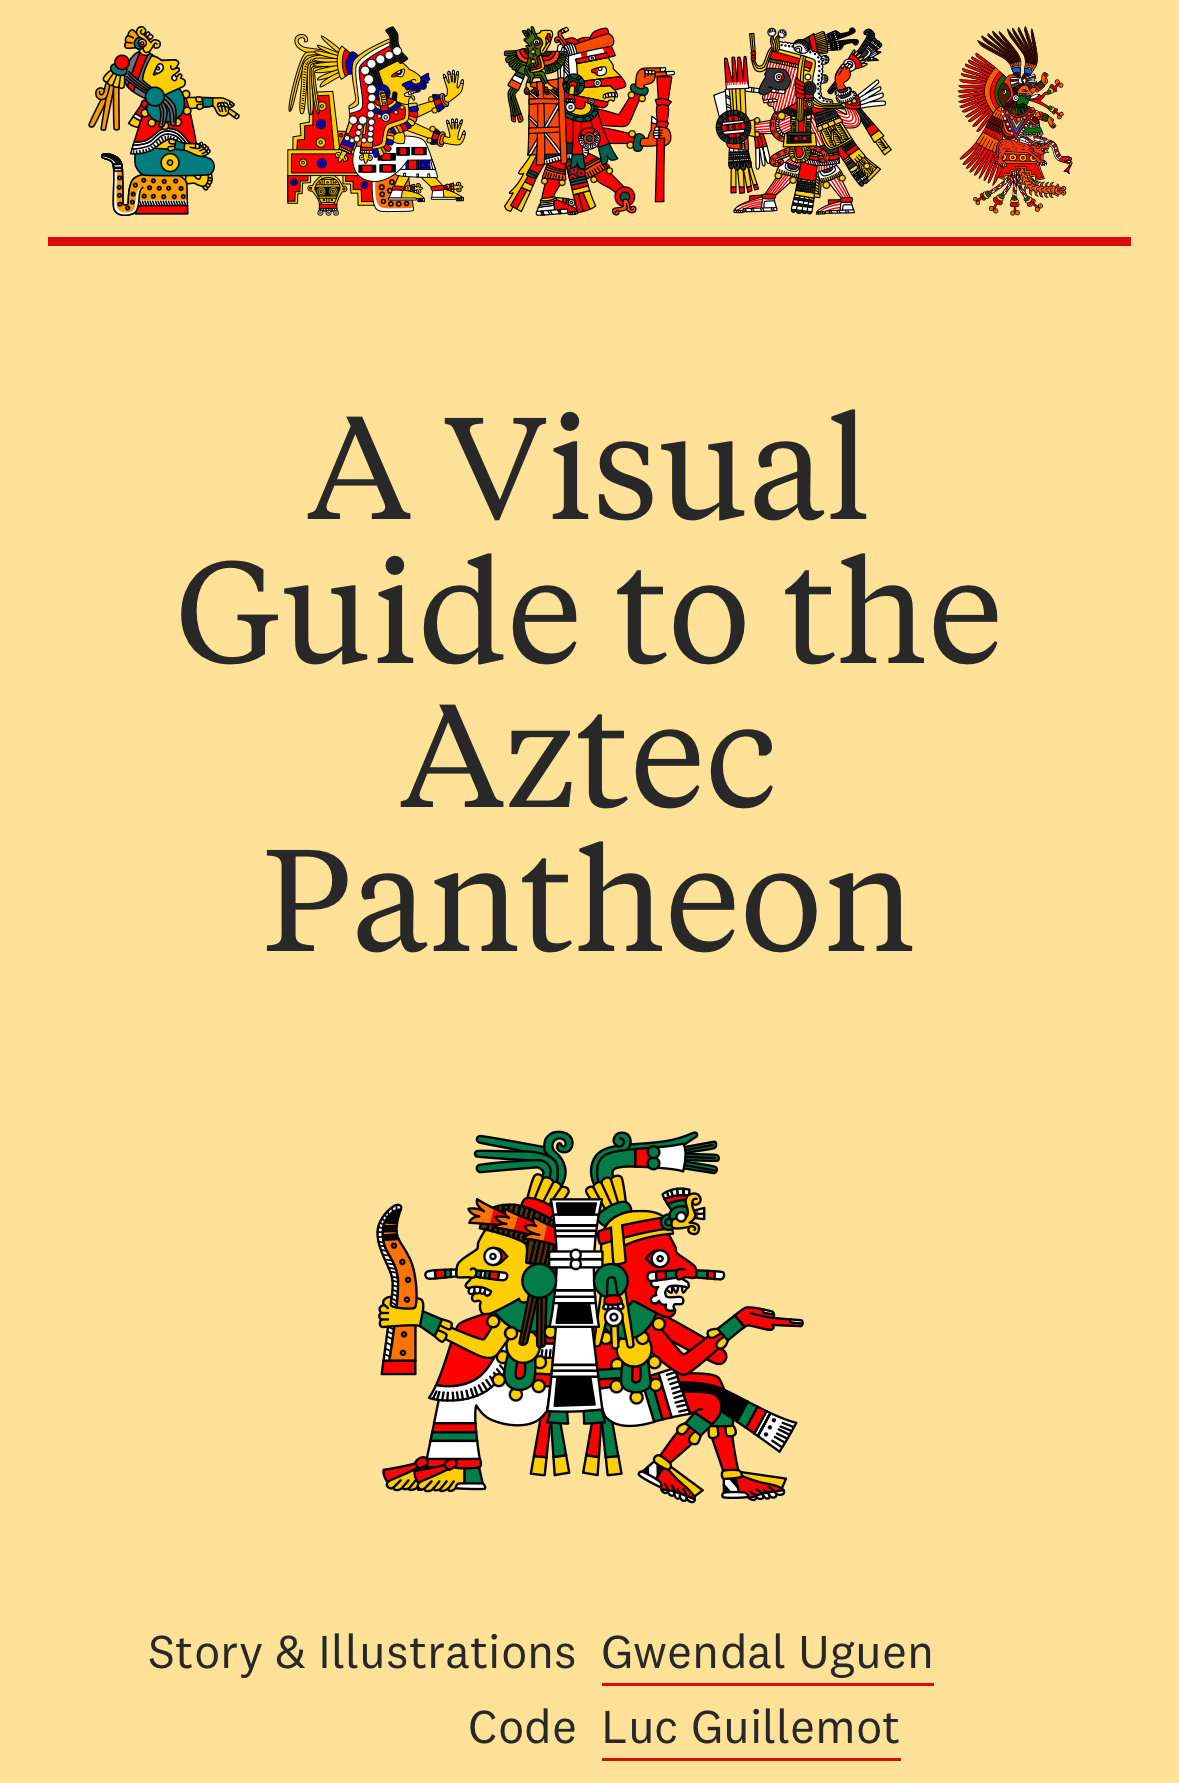 Screenshot of A Visual Guide to the Aztec Pantheon showing a few different drawings of the gods